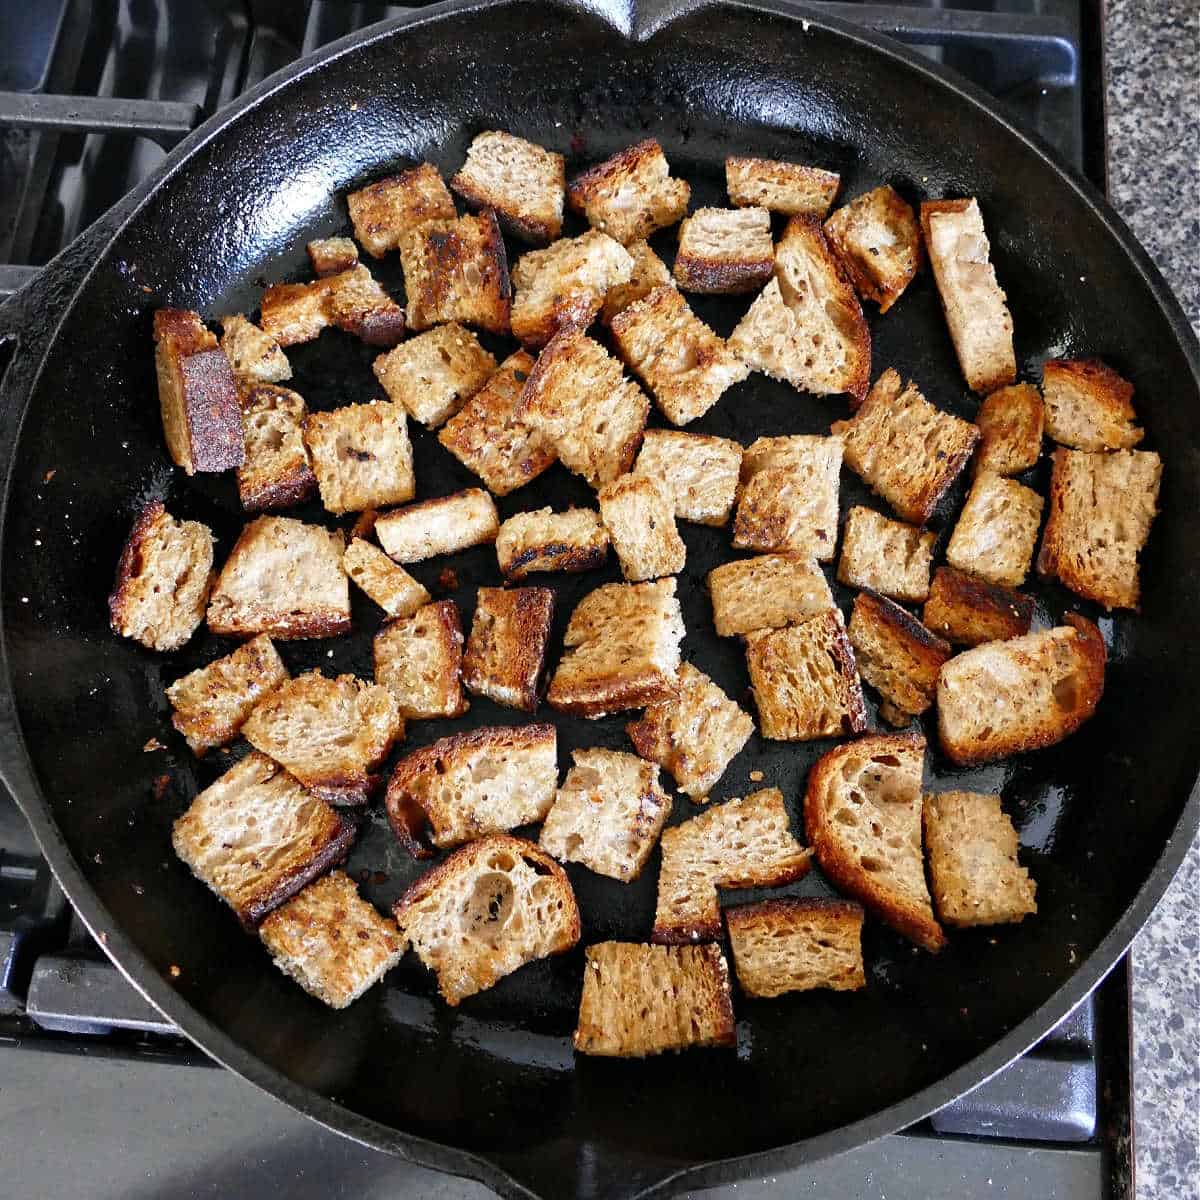 homemade sourdough croutons cooking in olive oil and seasonings in a cast iron skillet